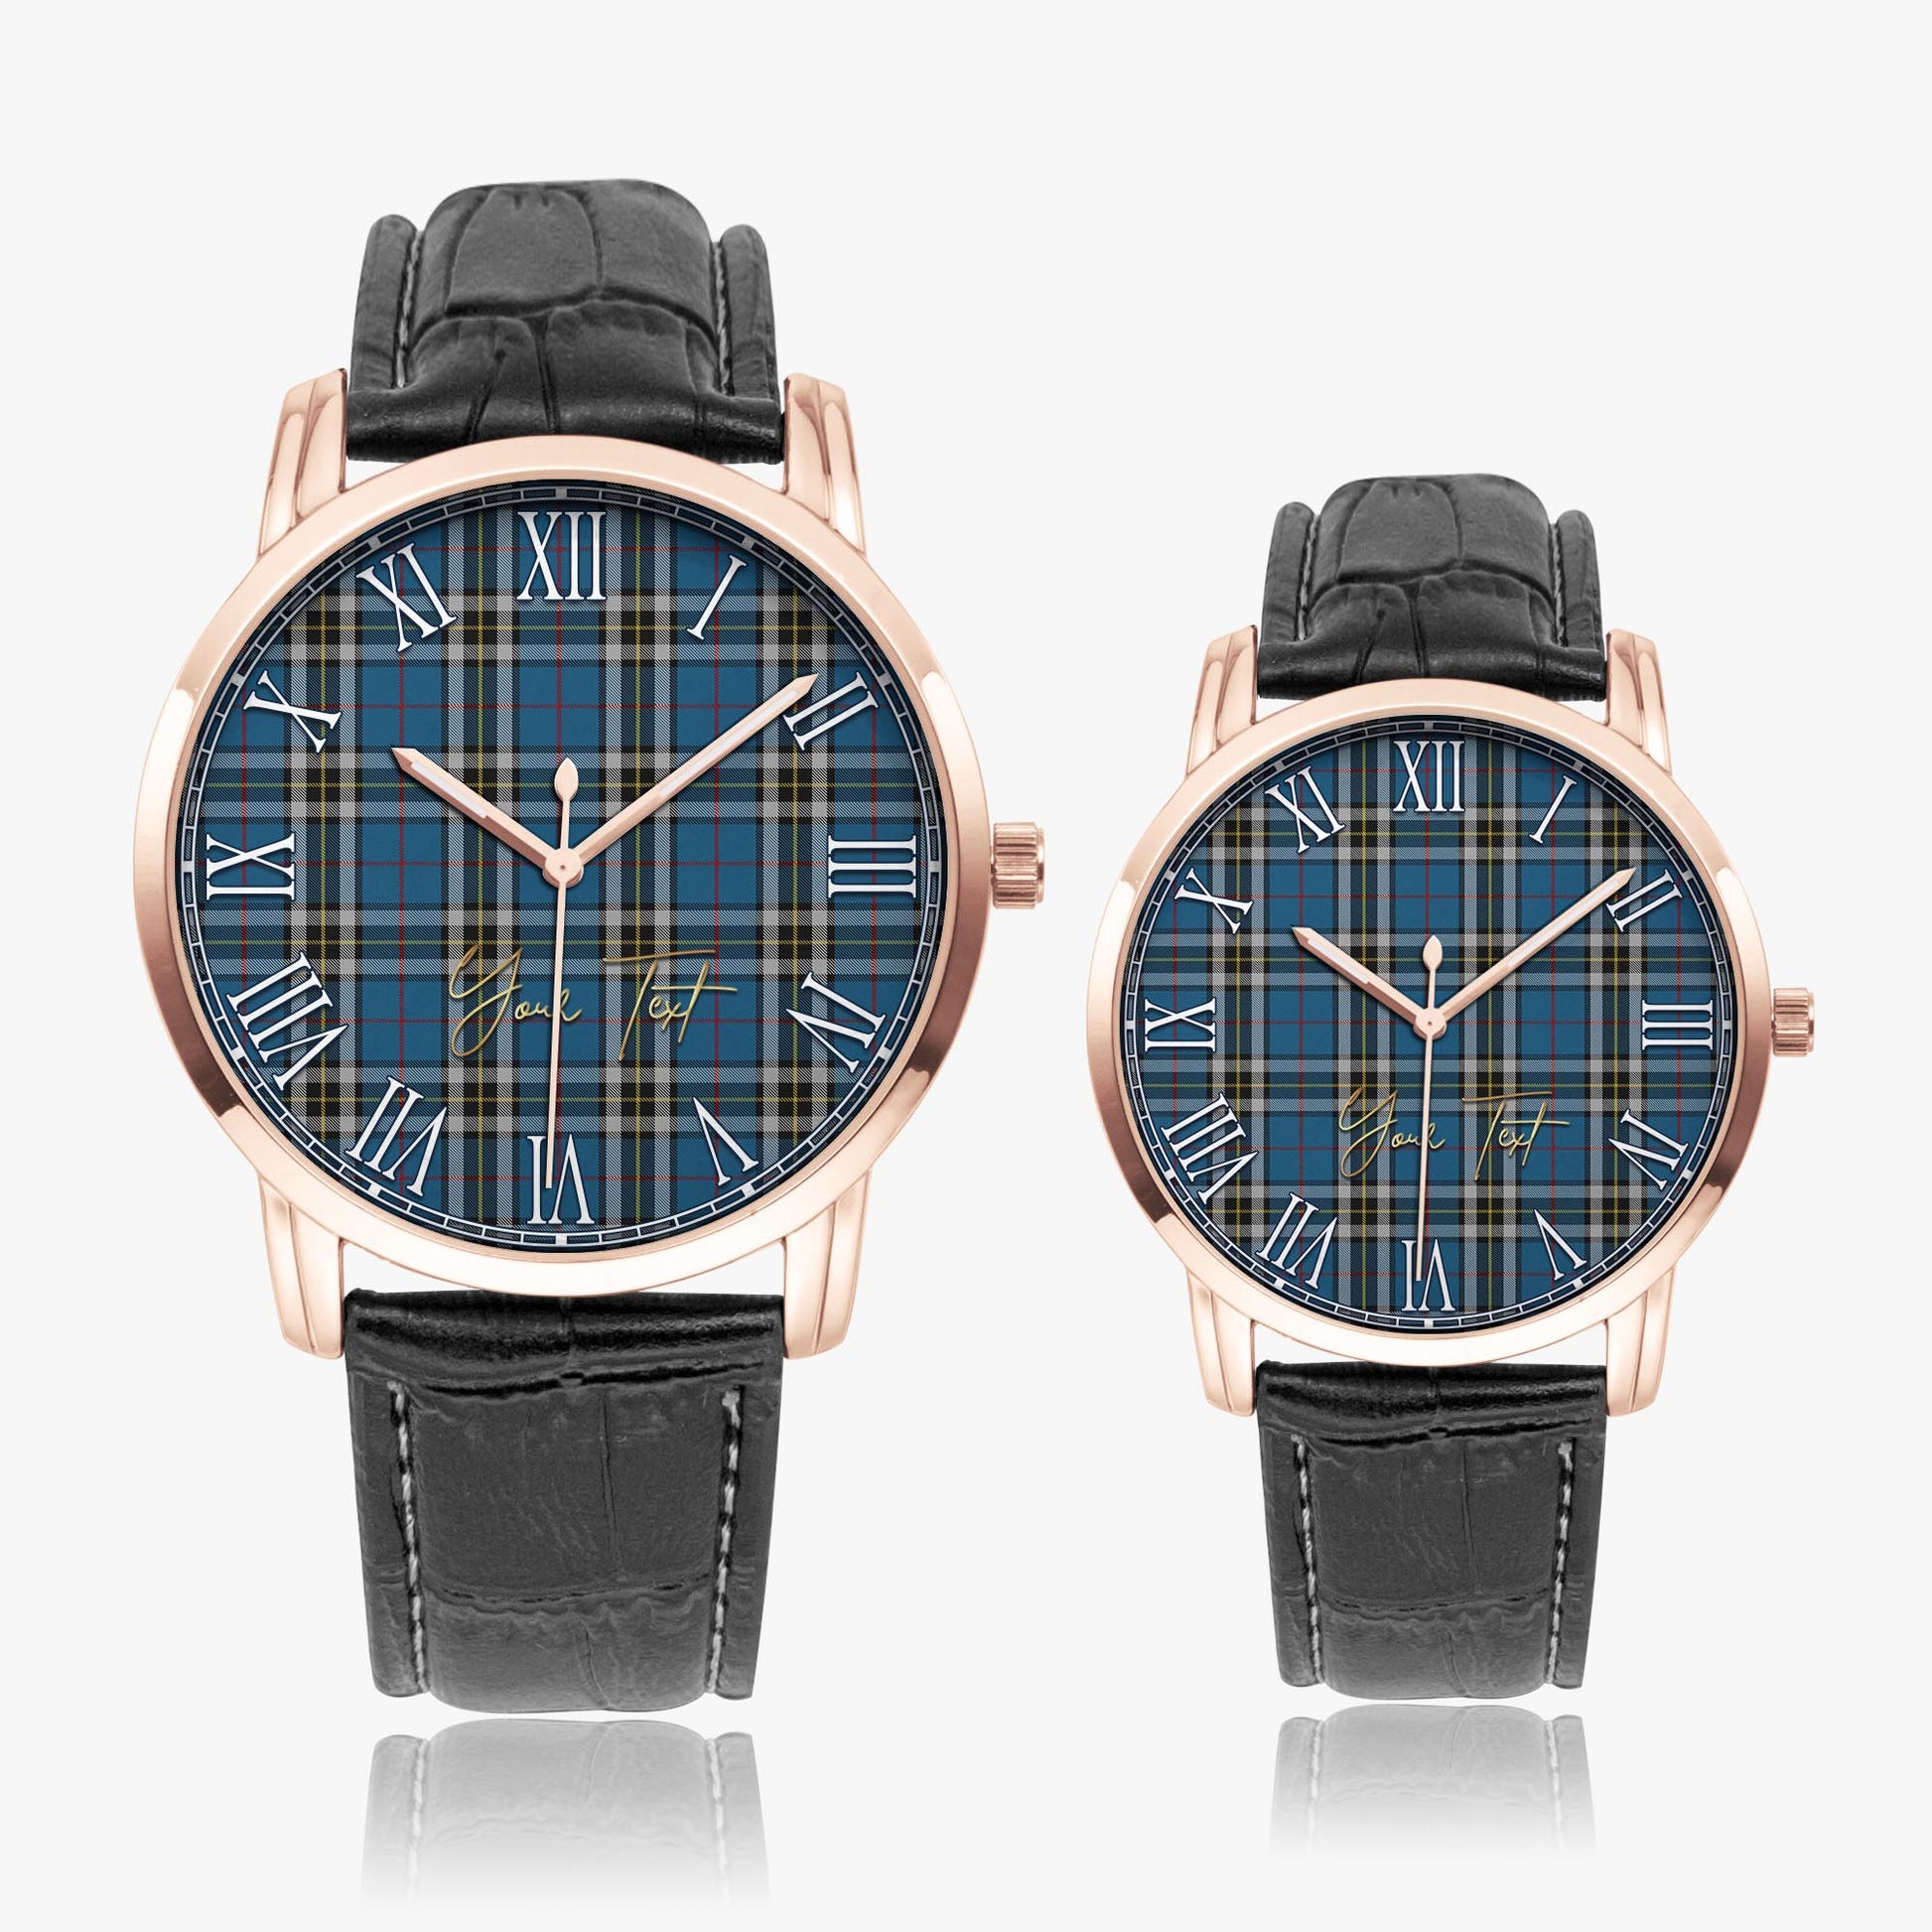 Thomson Dress Blue Tartan Personalized Your Text Leather Trap Quartz Watch Wide Type Rose Gold Case With Black Leather Strap - Tartanvibesclothing Shop